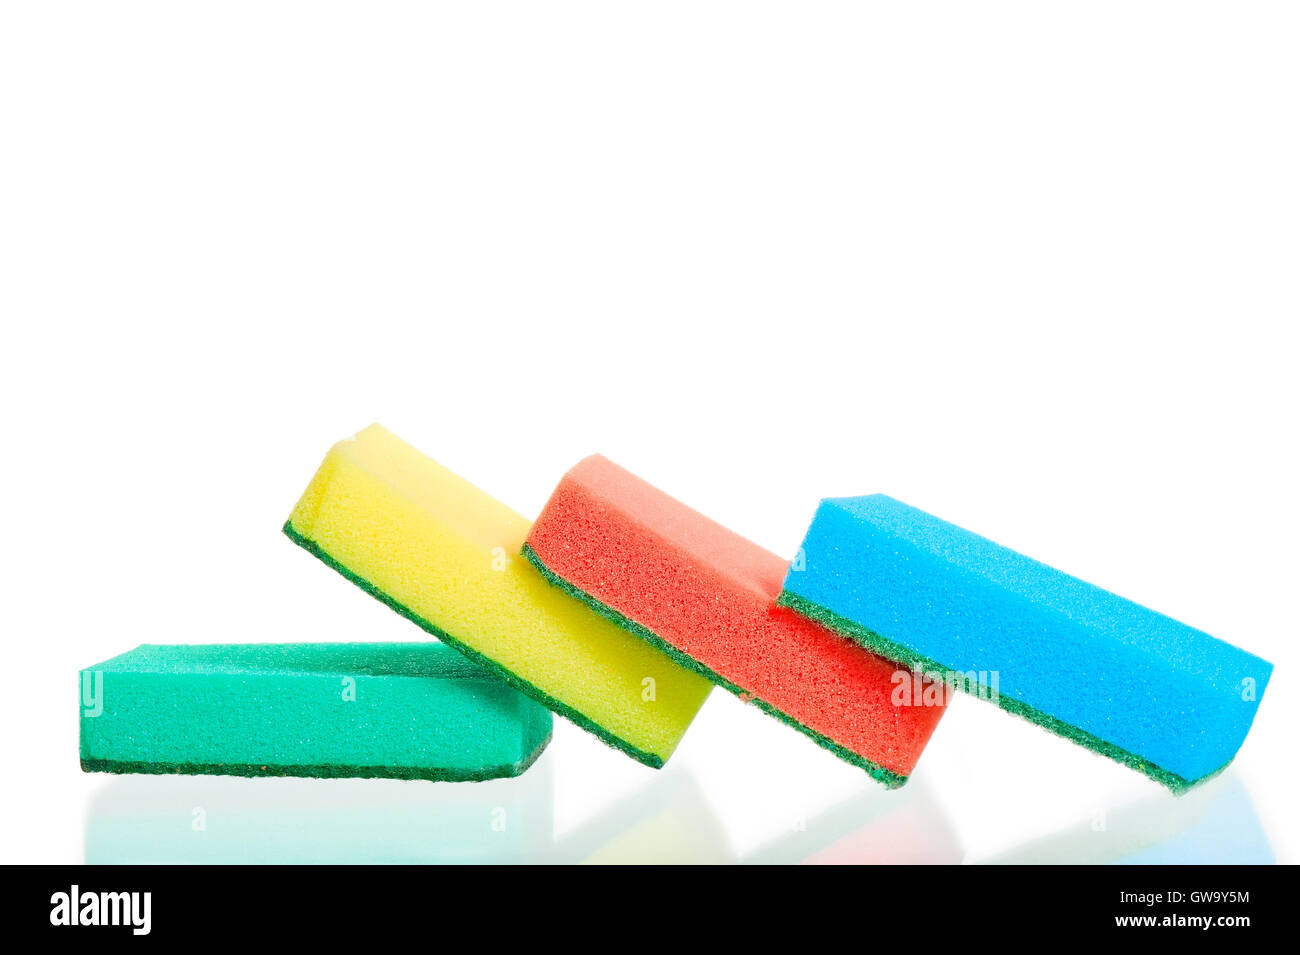 Four multi-colored sponges on white background Stock Photo